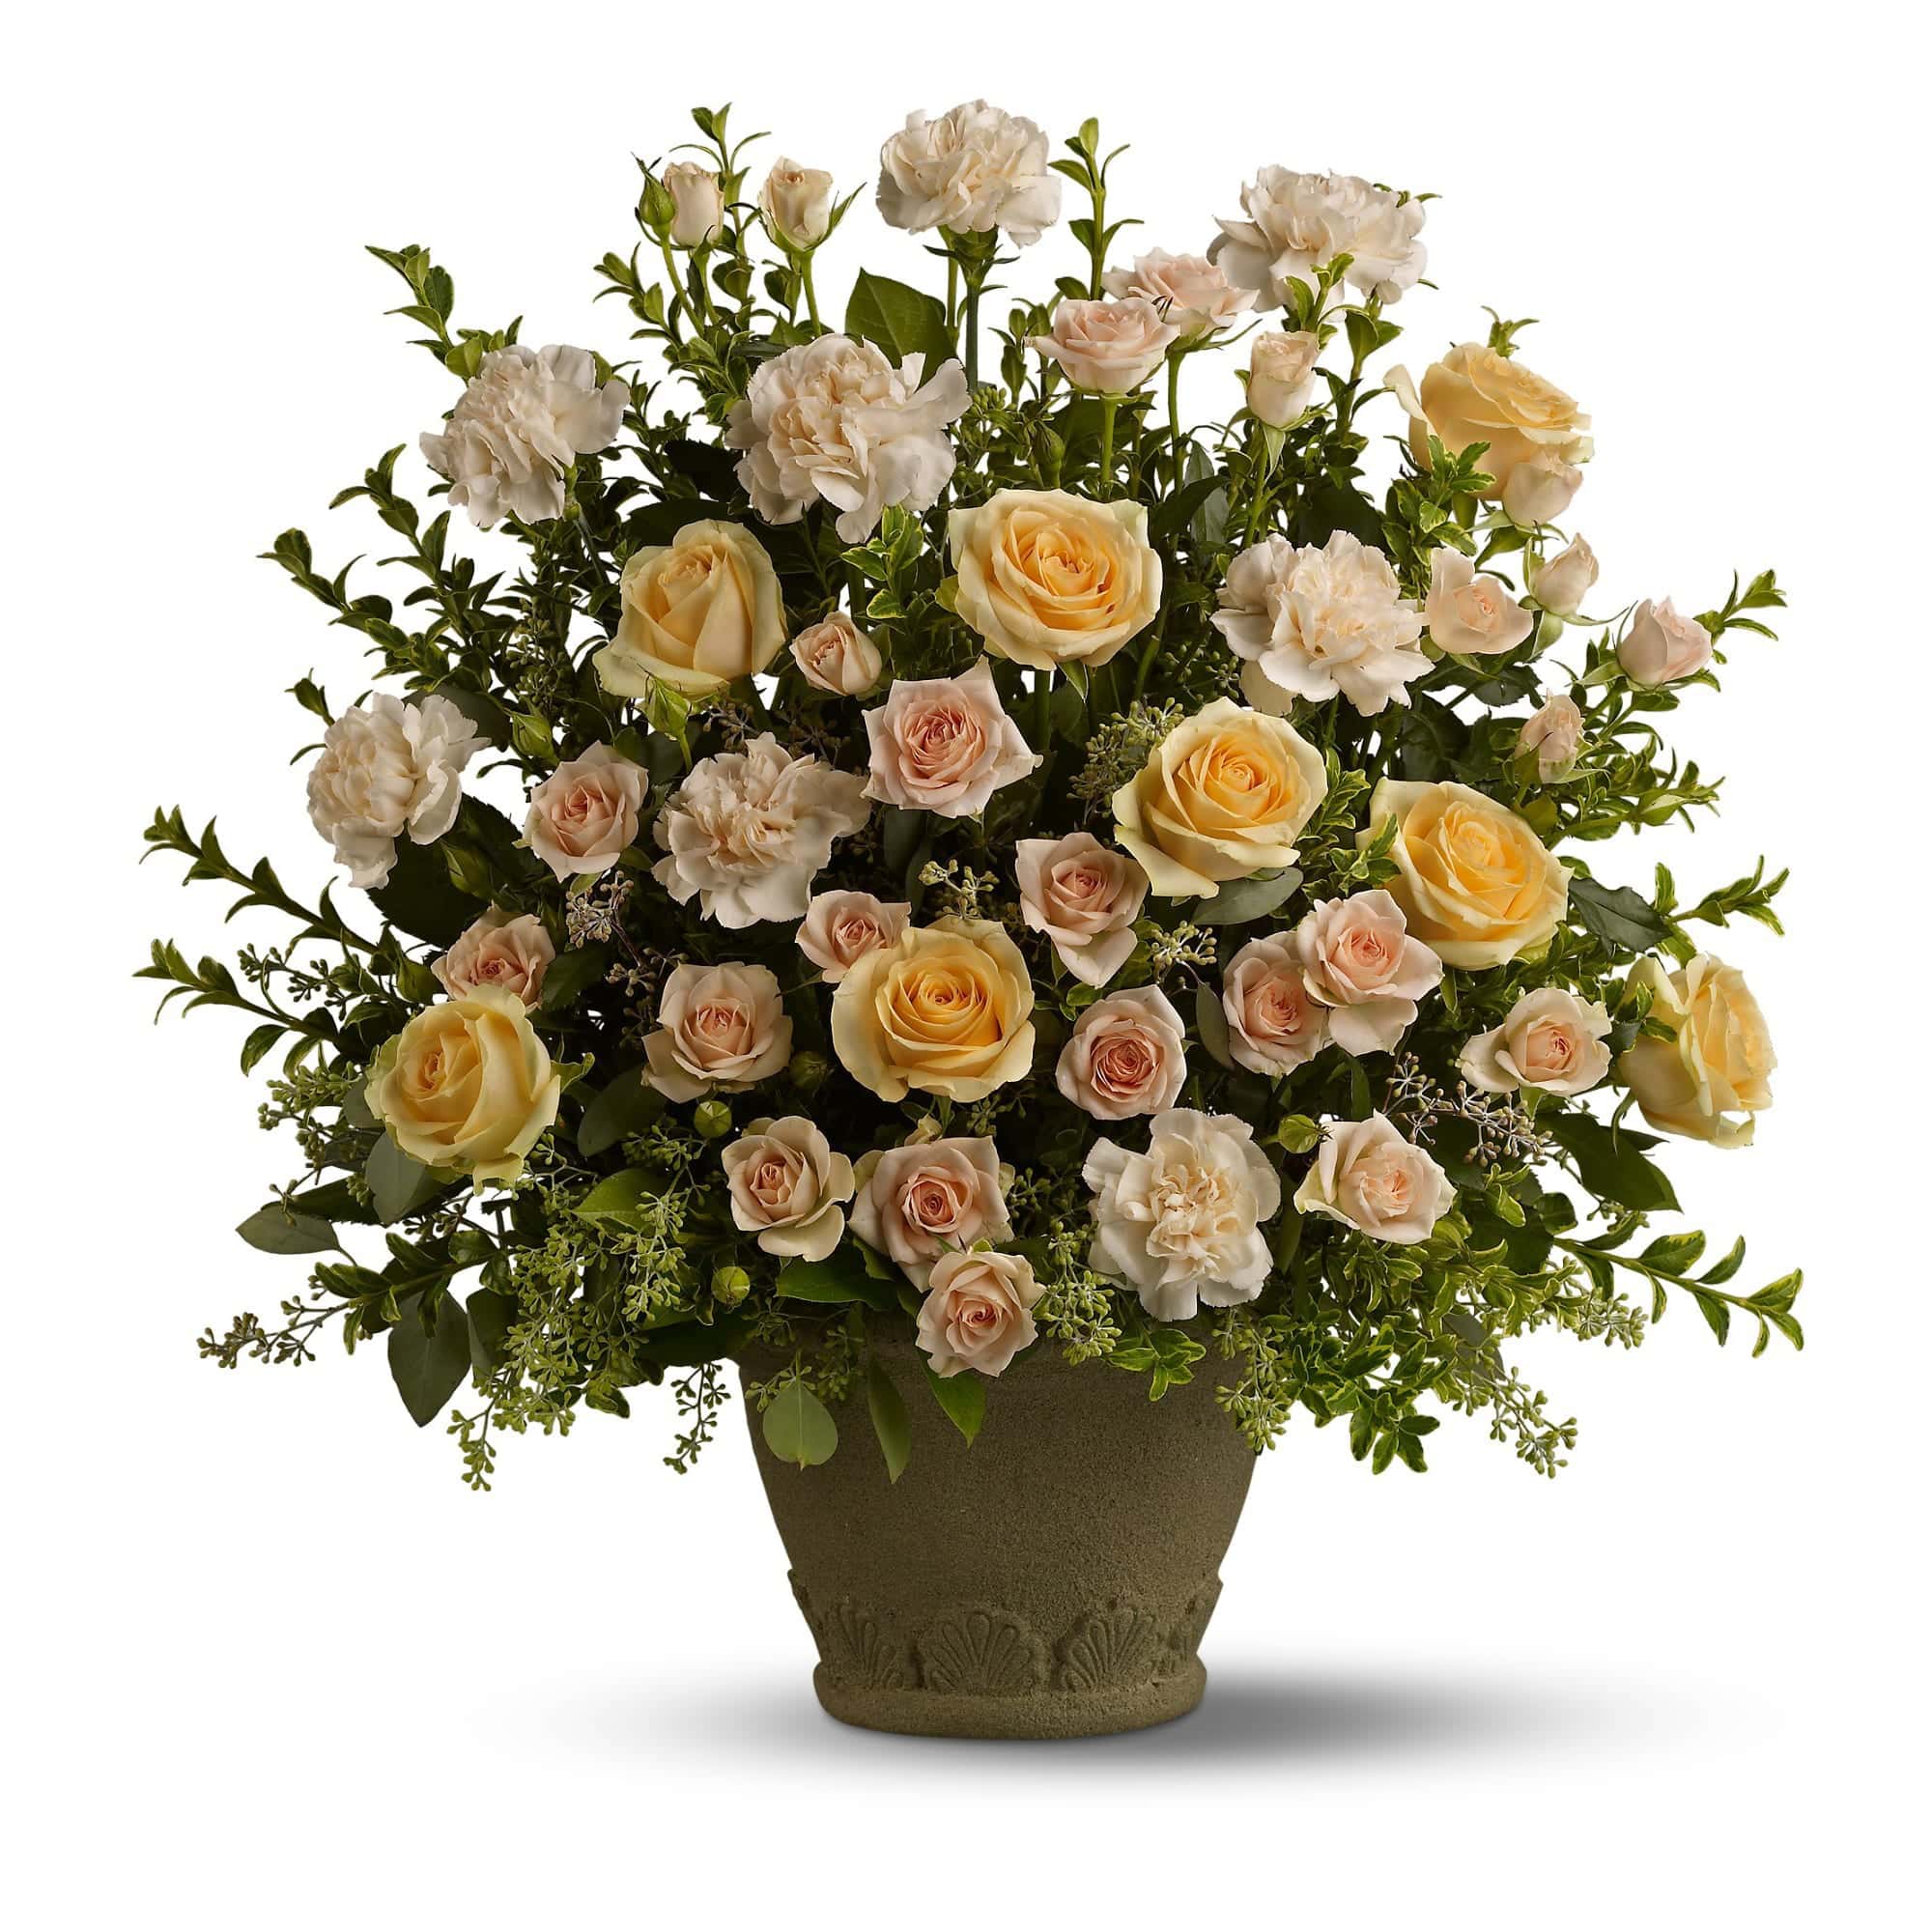 This stately arrangement features flowers such as peach roses and carnations accented with seeded eucalyptus